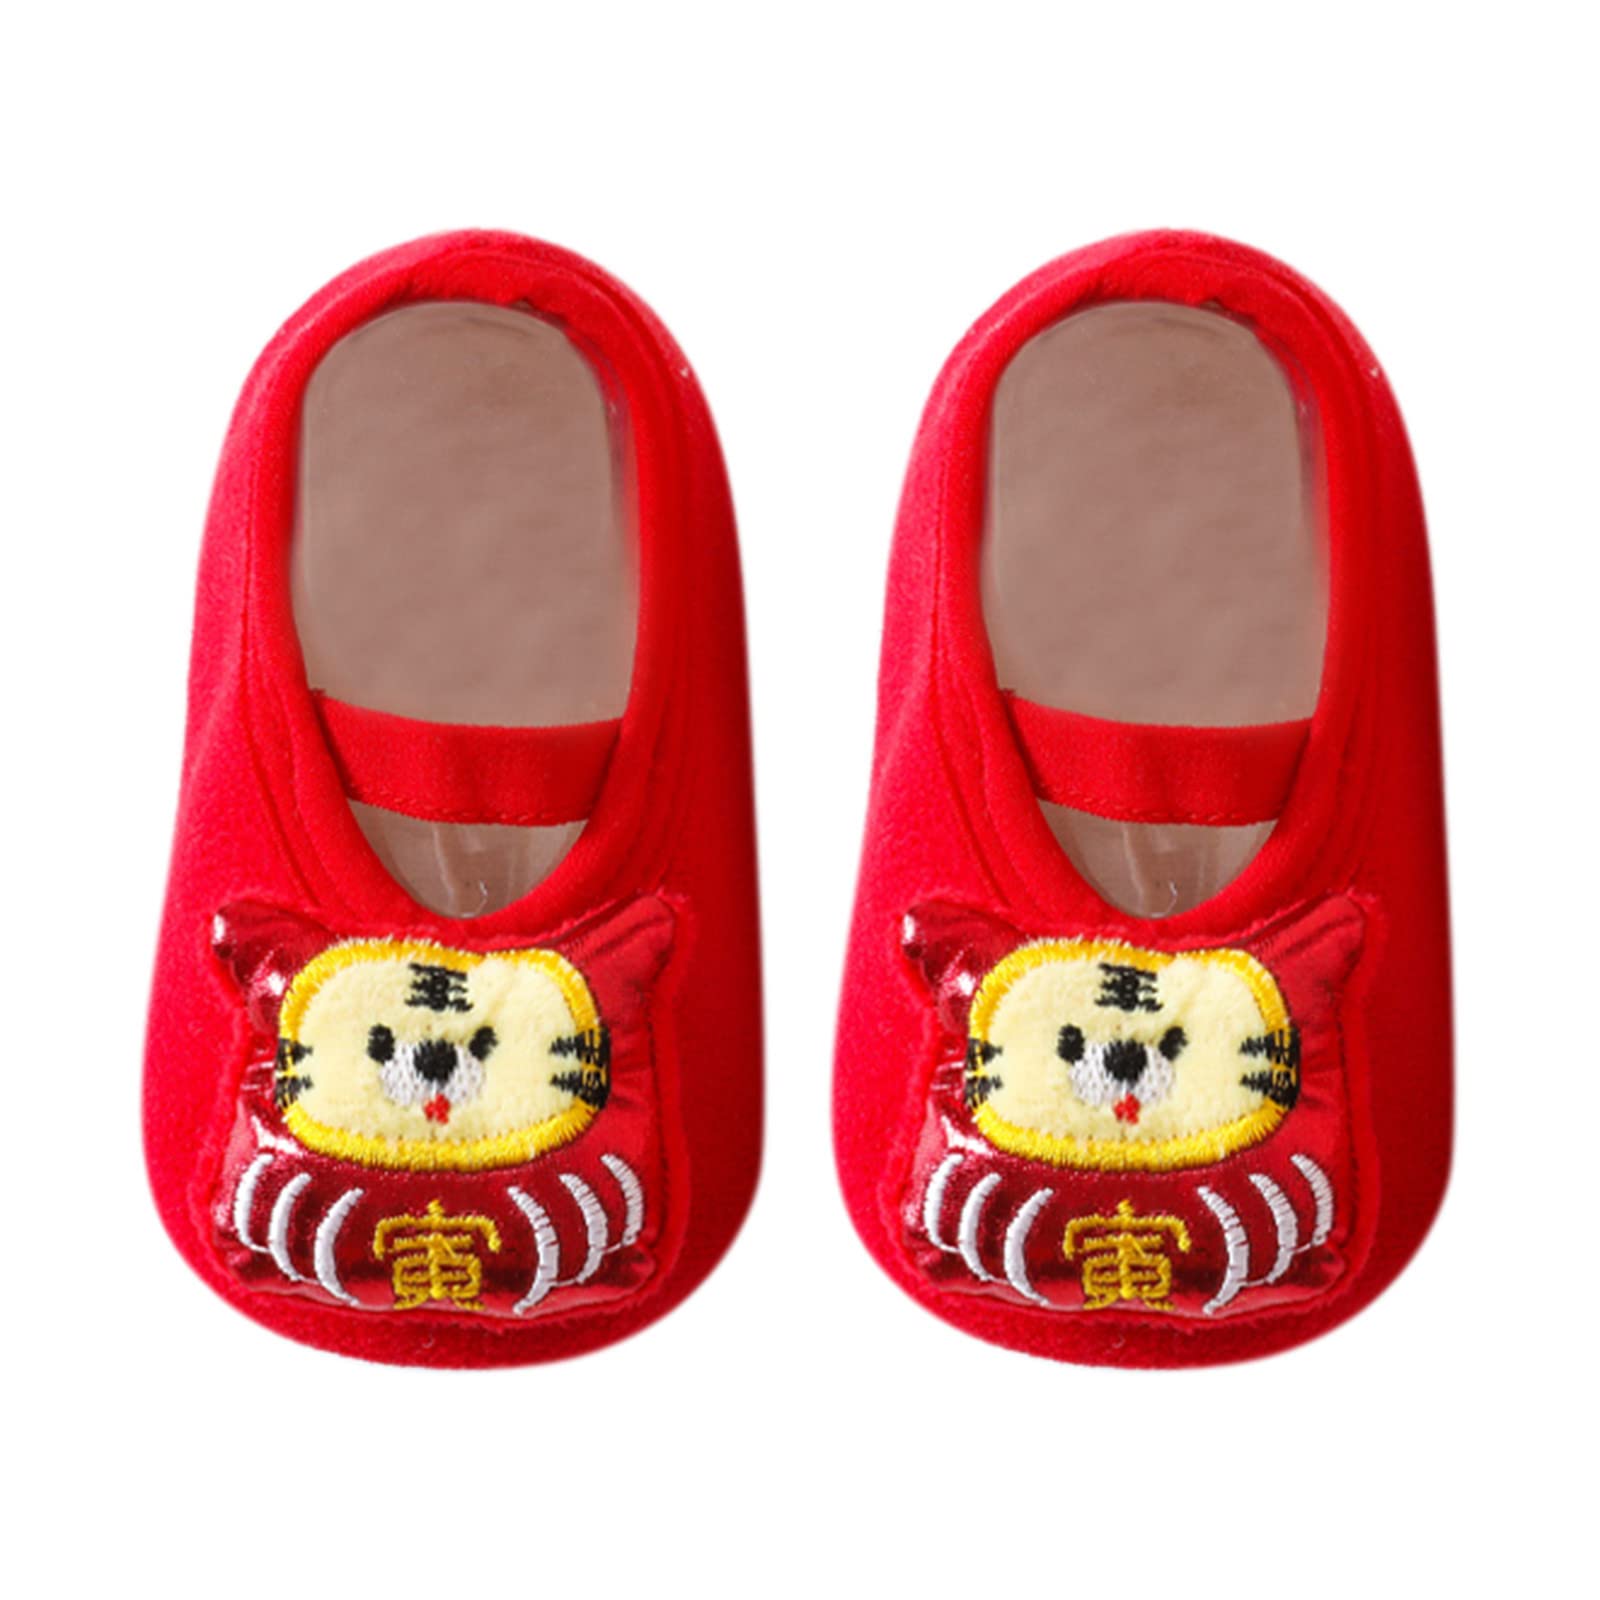 Boys Open Toe Shoes Boys and Girls Cartoon Character Pattern Warm Toddler Shoes Indoor Floor Toddler Shoes Size 8 Boys